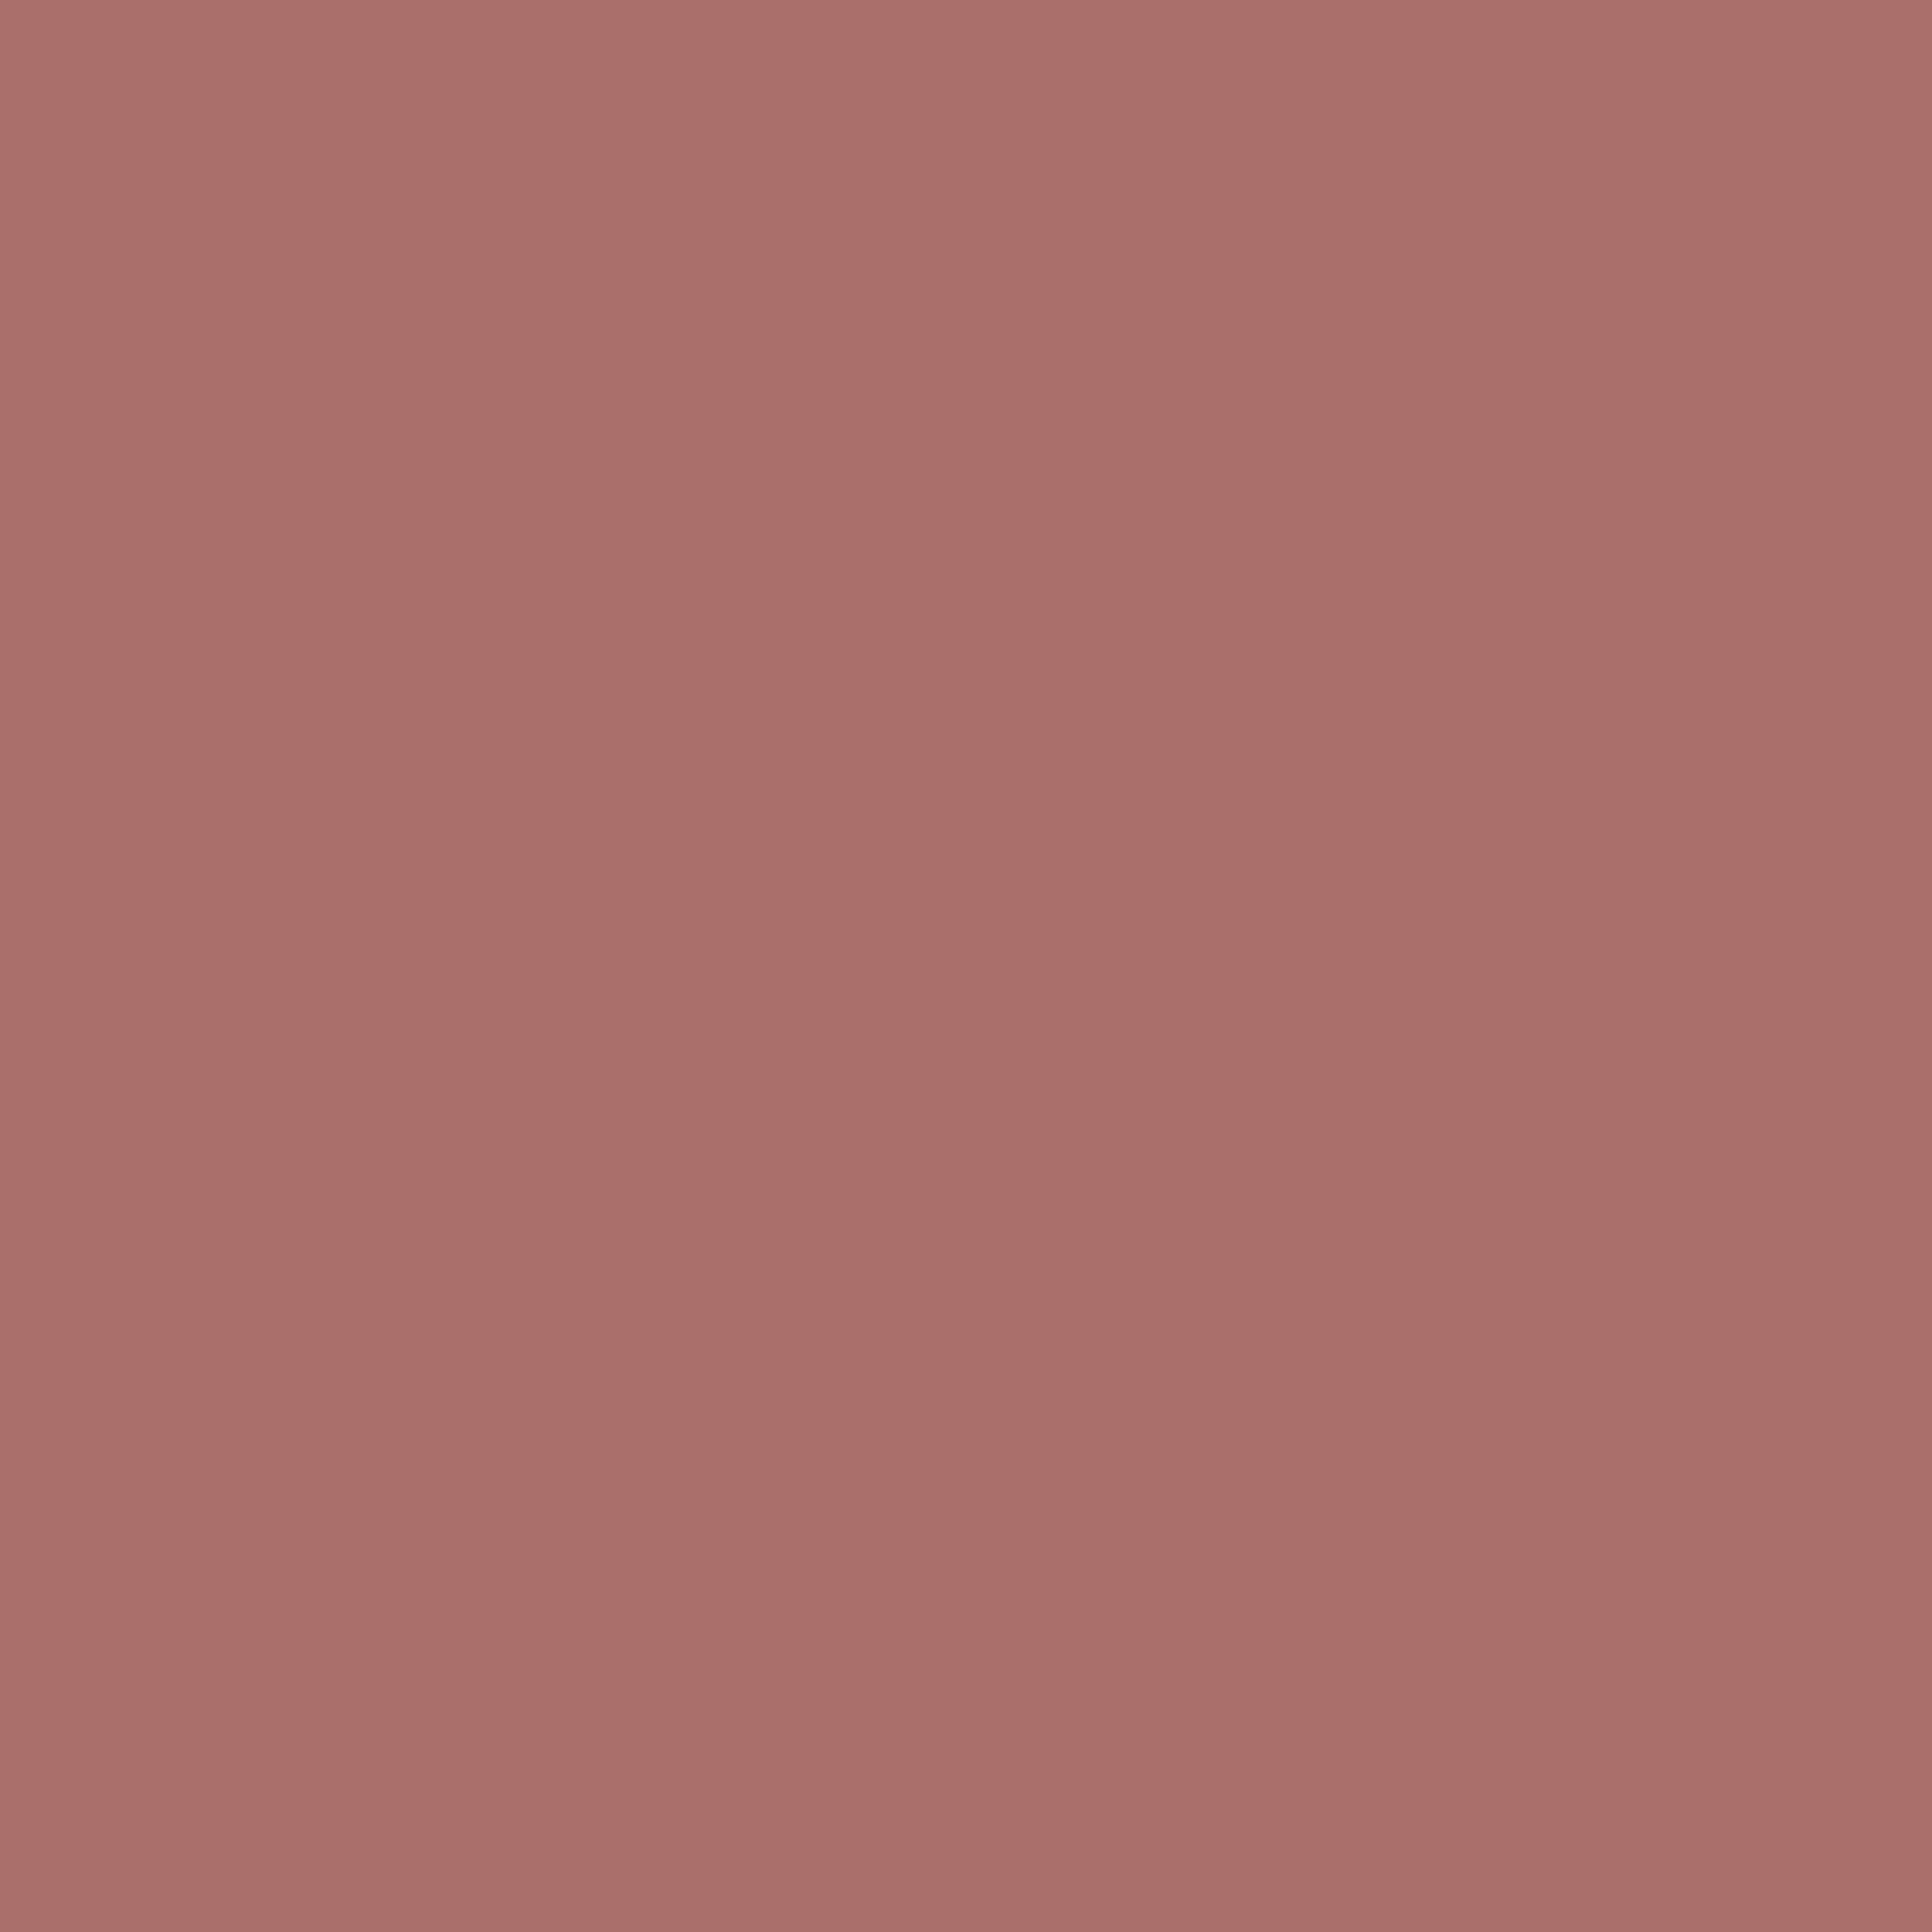 2732x2732 Copper Penny Solid Color Background